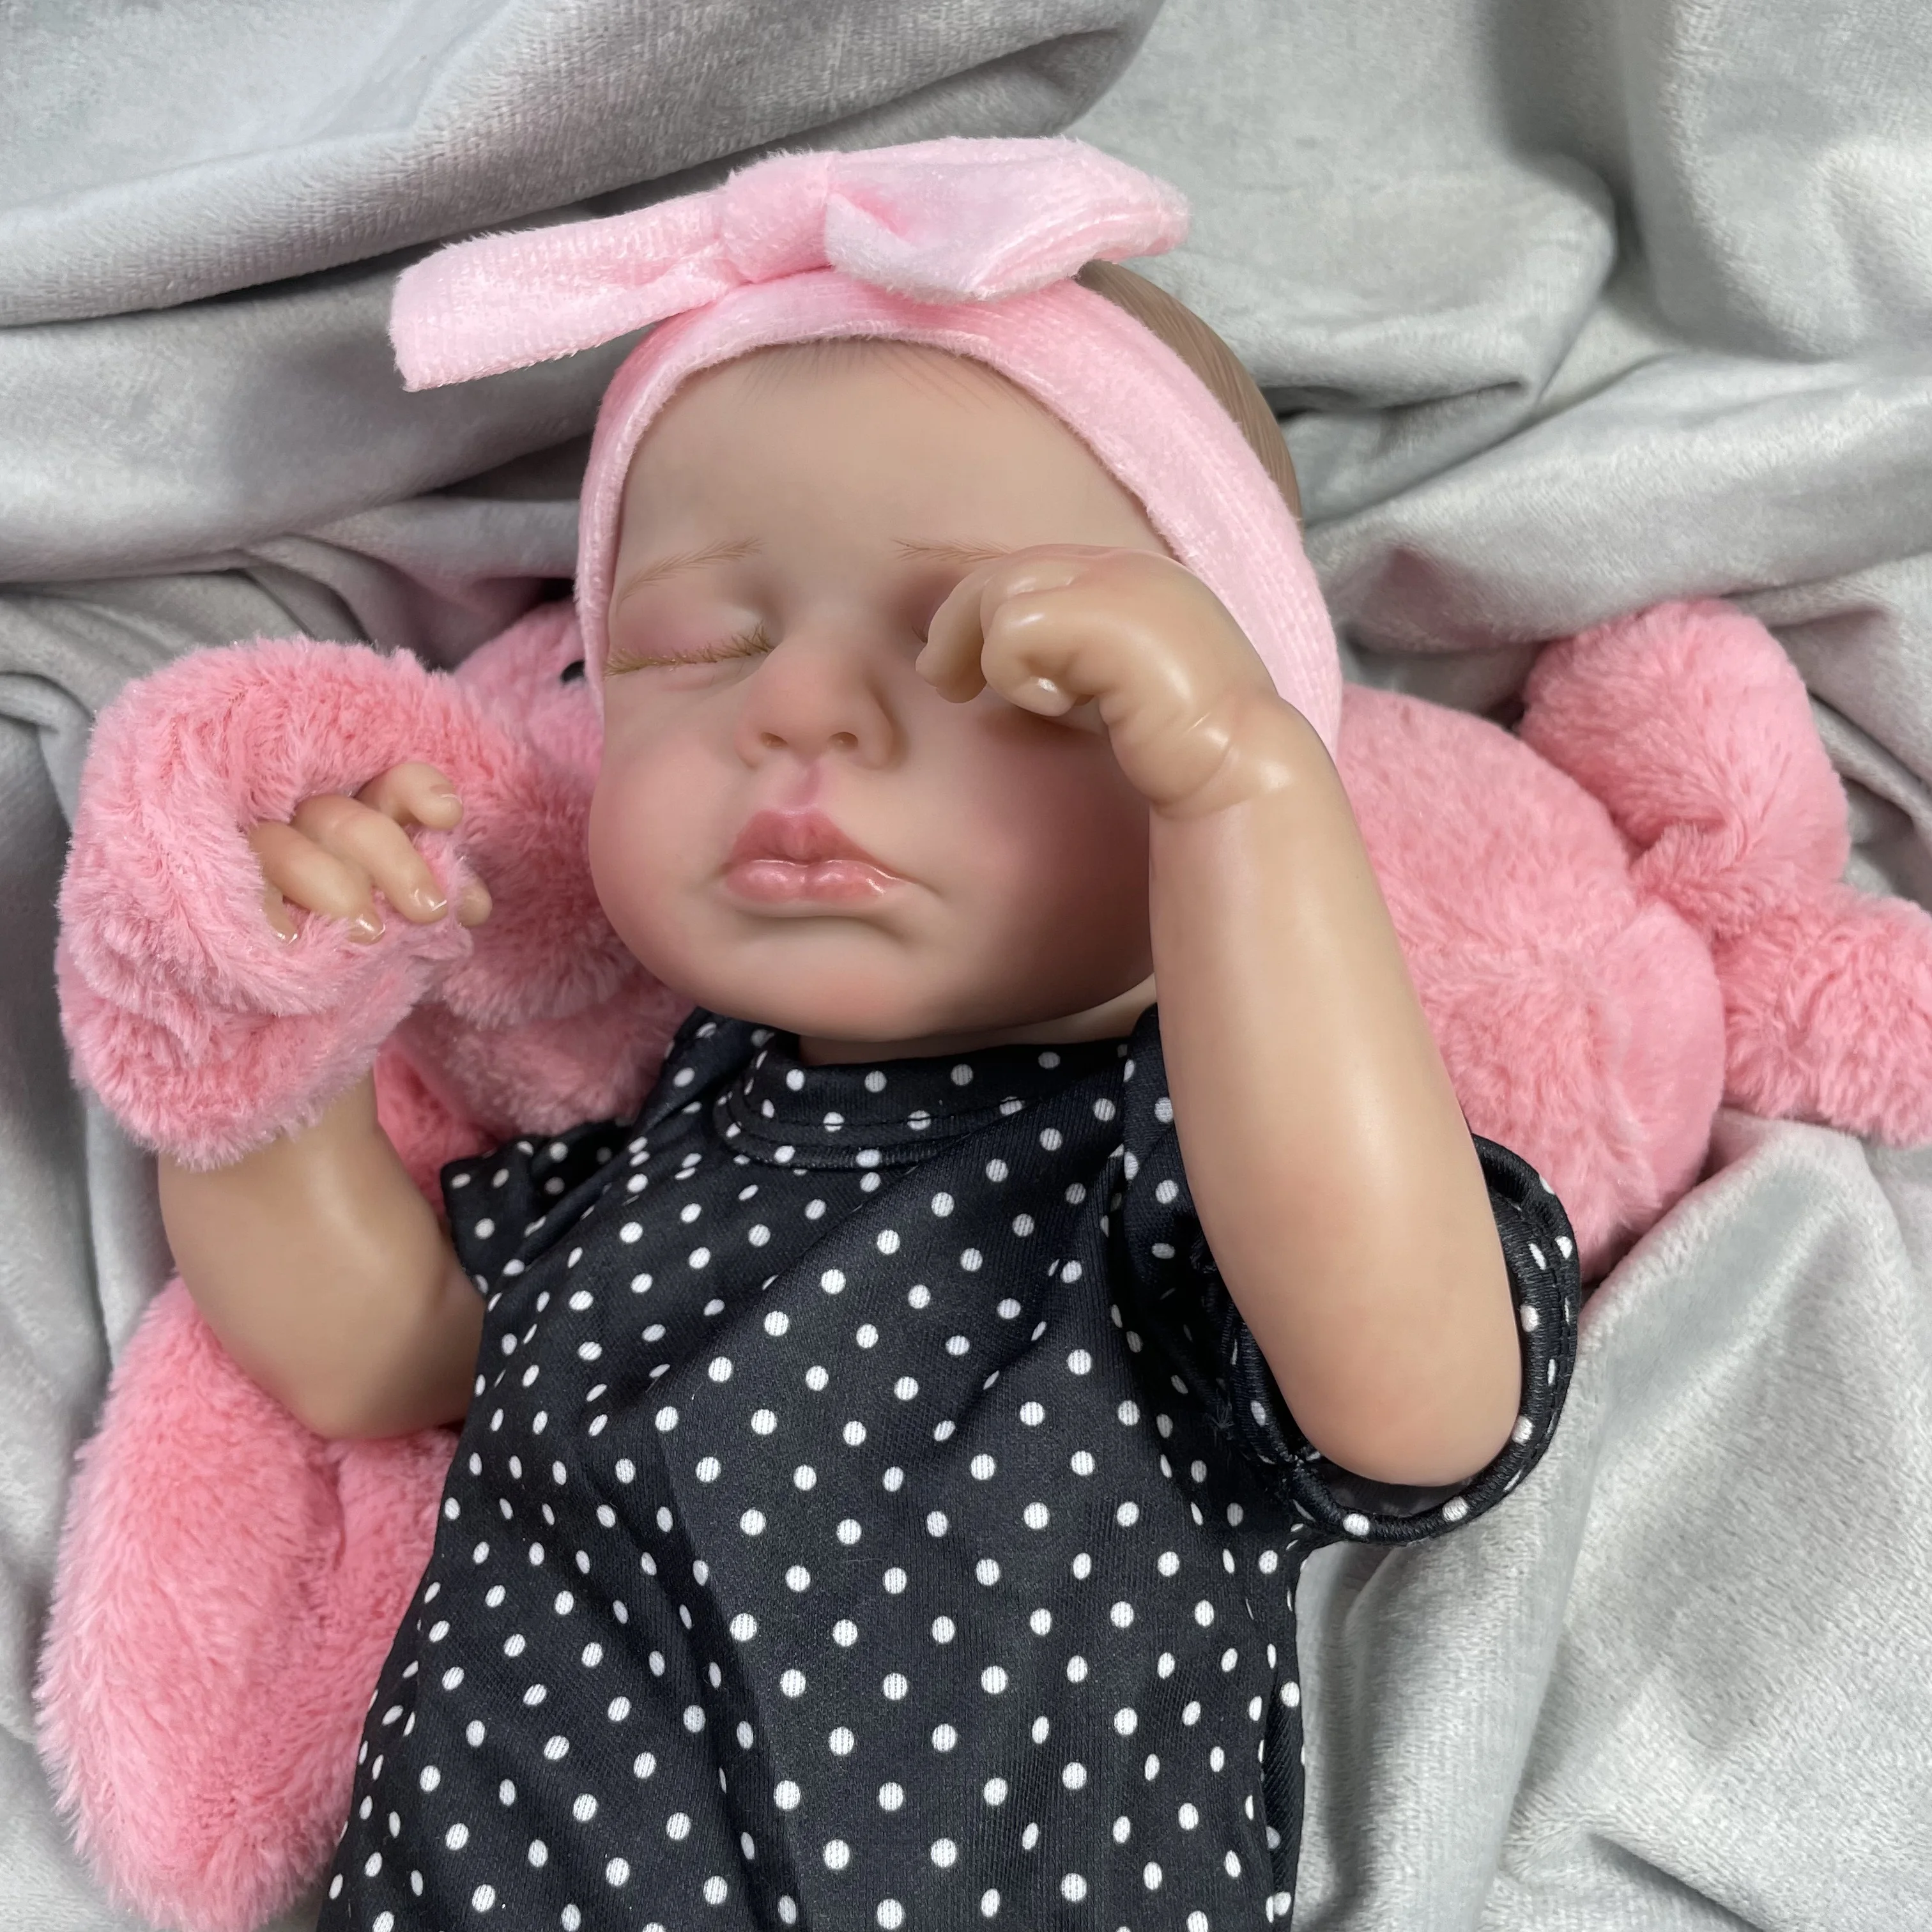 50CM Finished Reborn Baby Dolls LouLou Best Christmas Gift Lifelike Silicone Vinyl Newborn 3D Skin Visible - Reborn Doll World